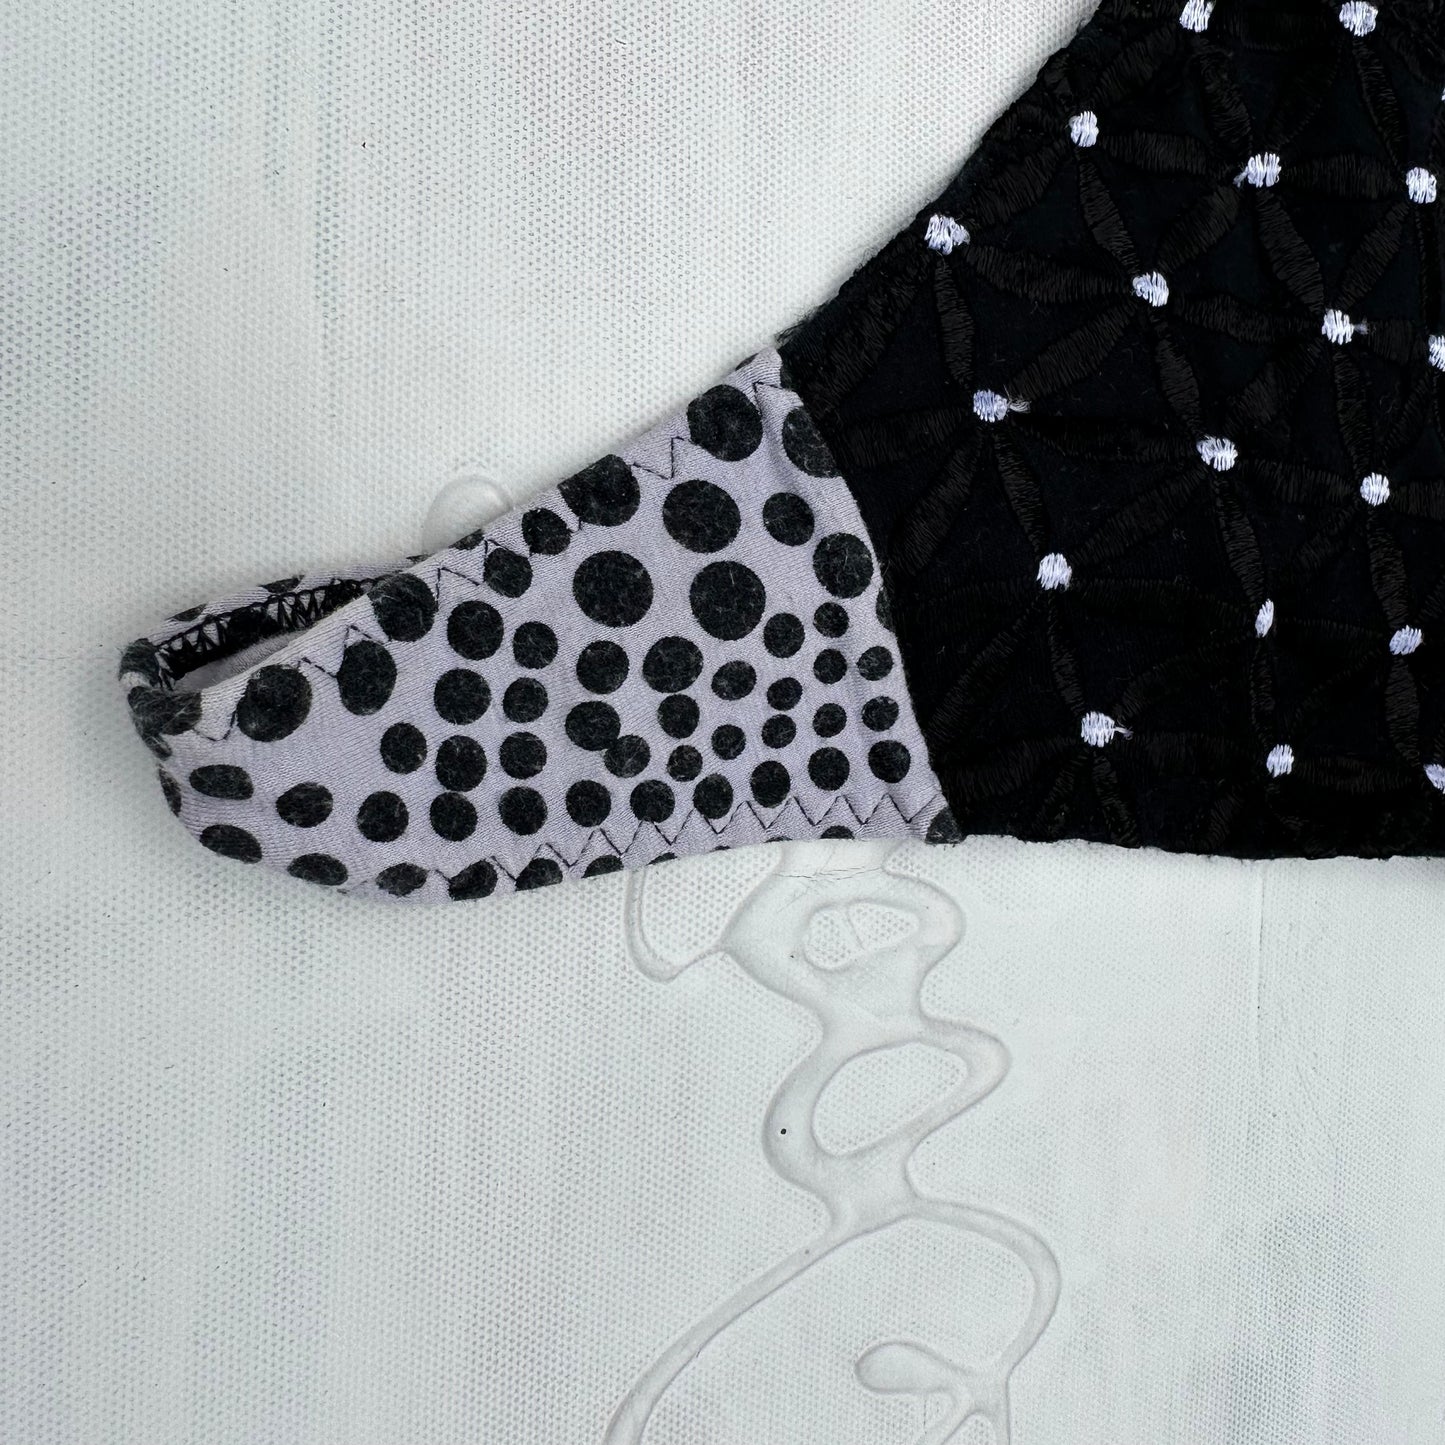 DAINTY DROP | black broderie with white polka dots - small